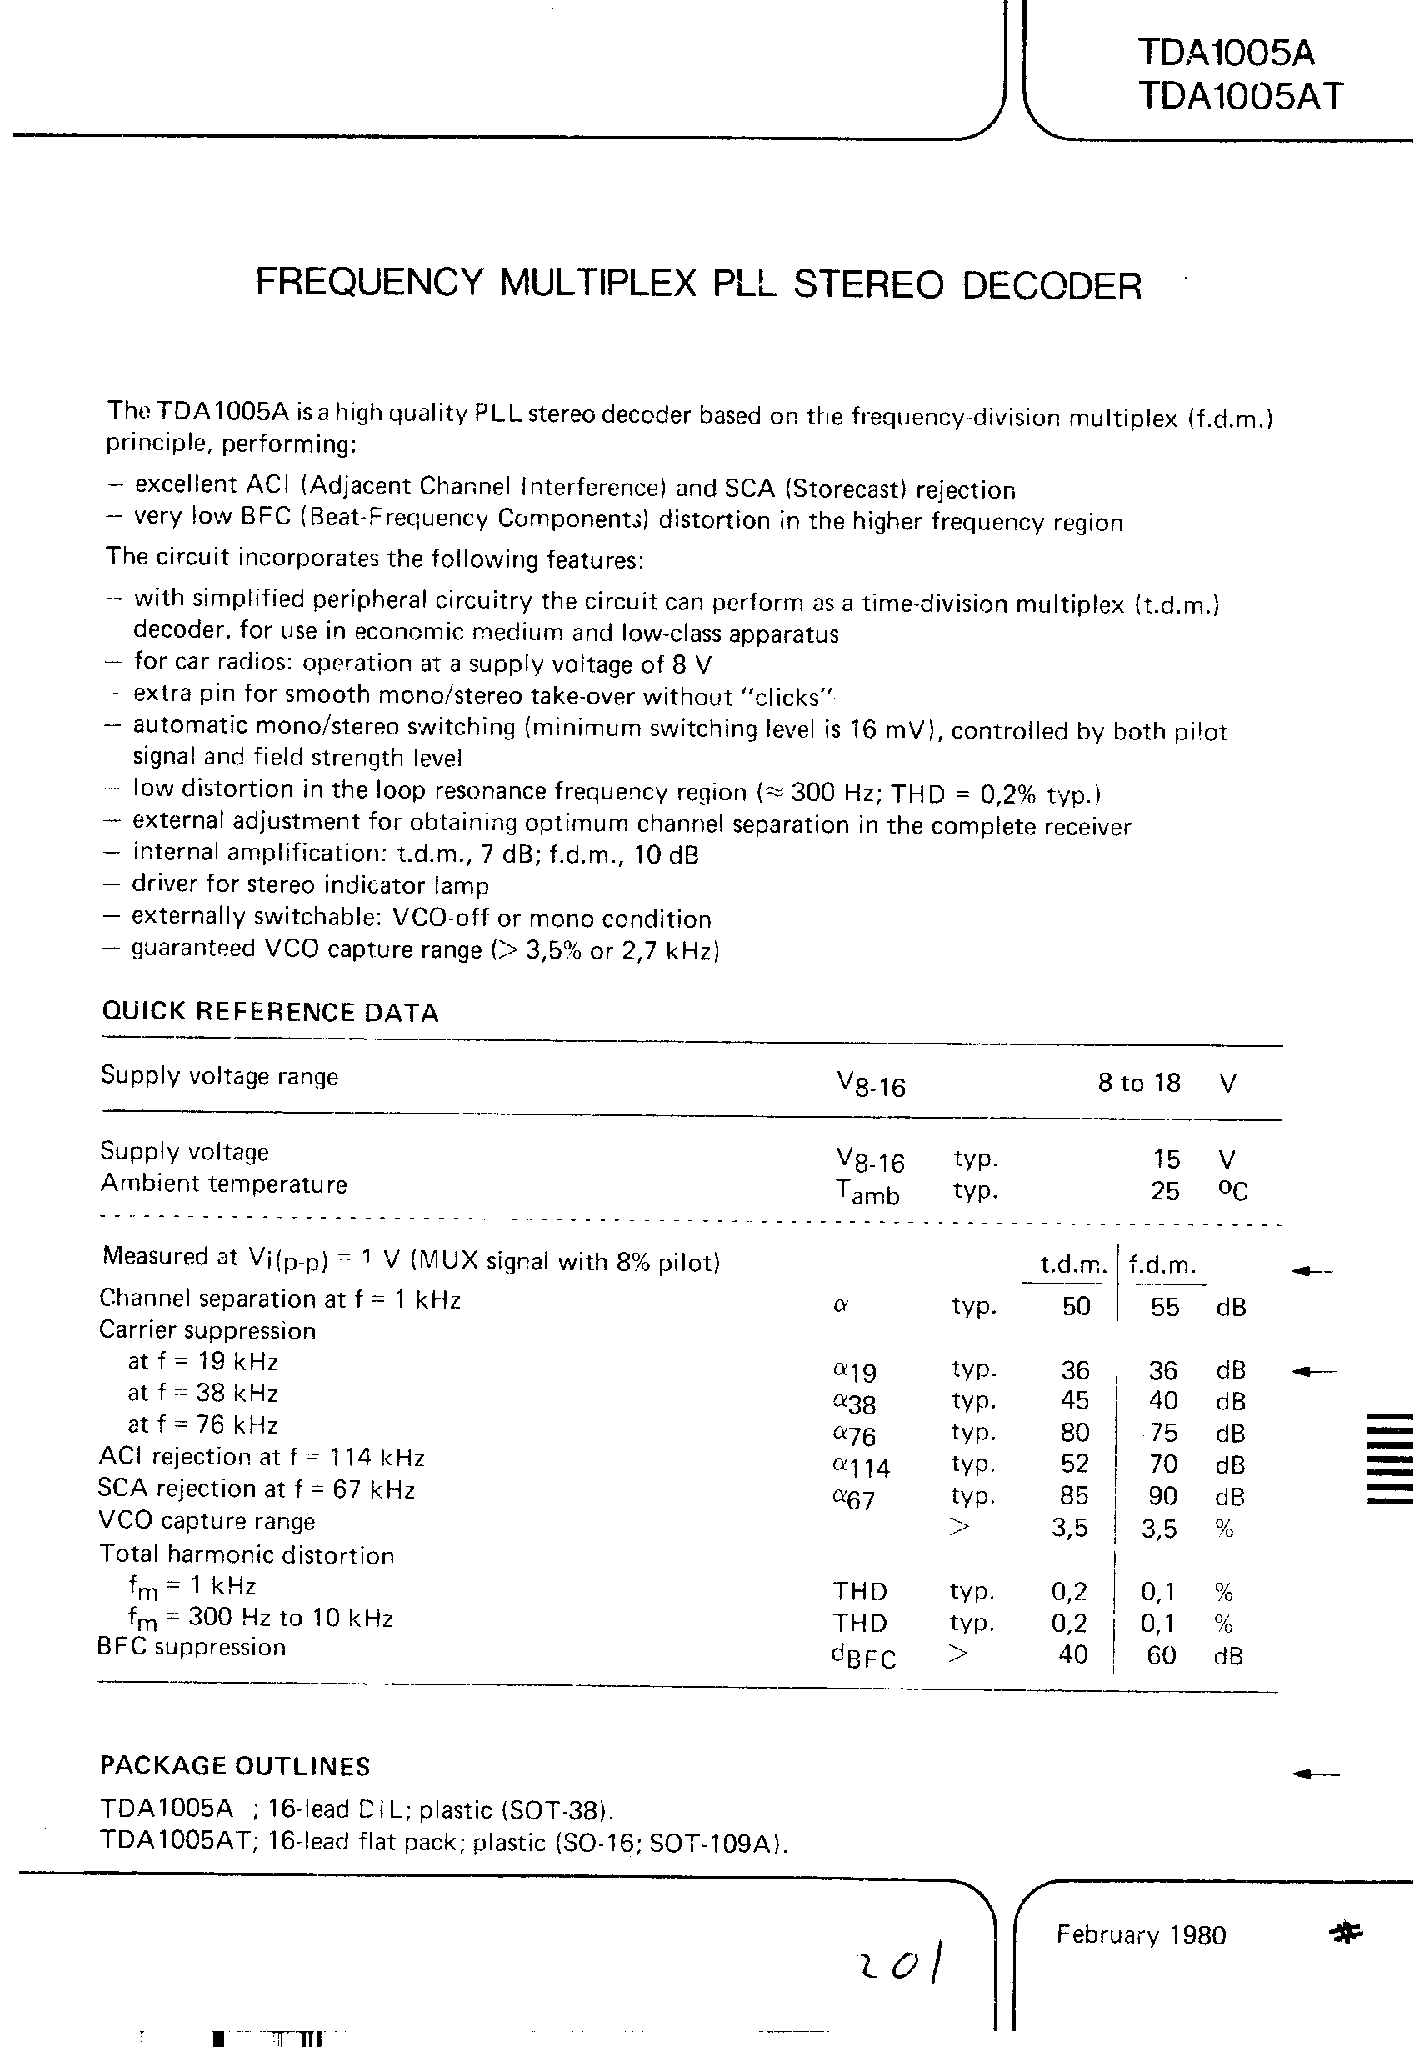 Datasheet TDA1005A - FREQUENCY MULTIPLEX PLL STEREO DECODER page 1